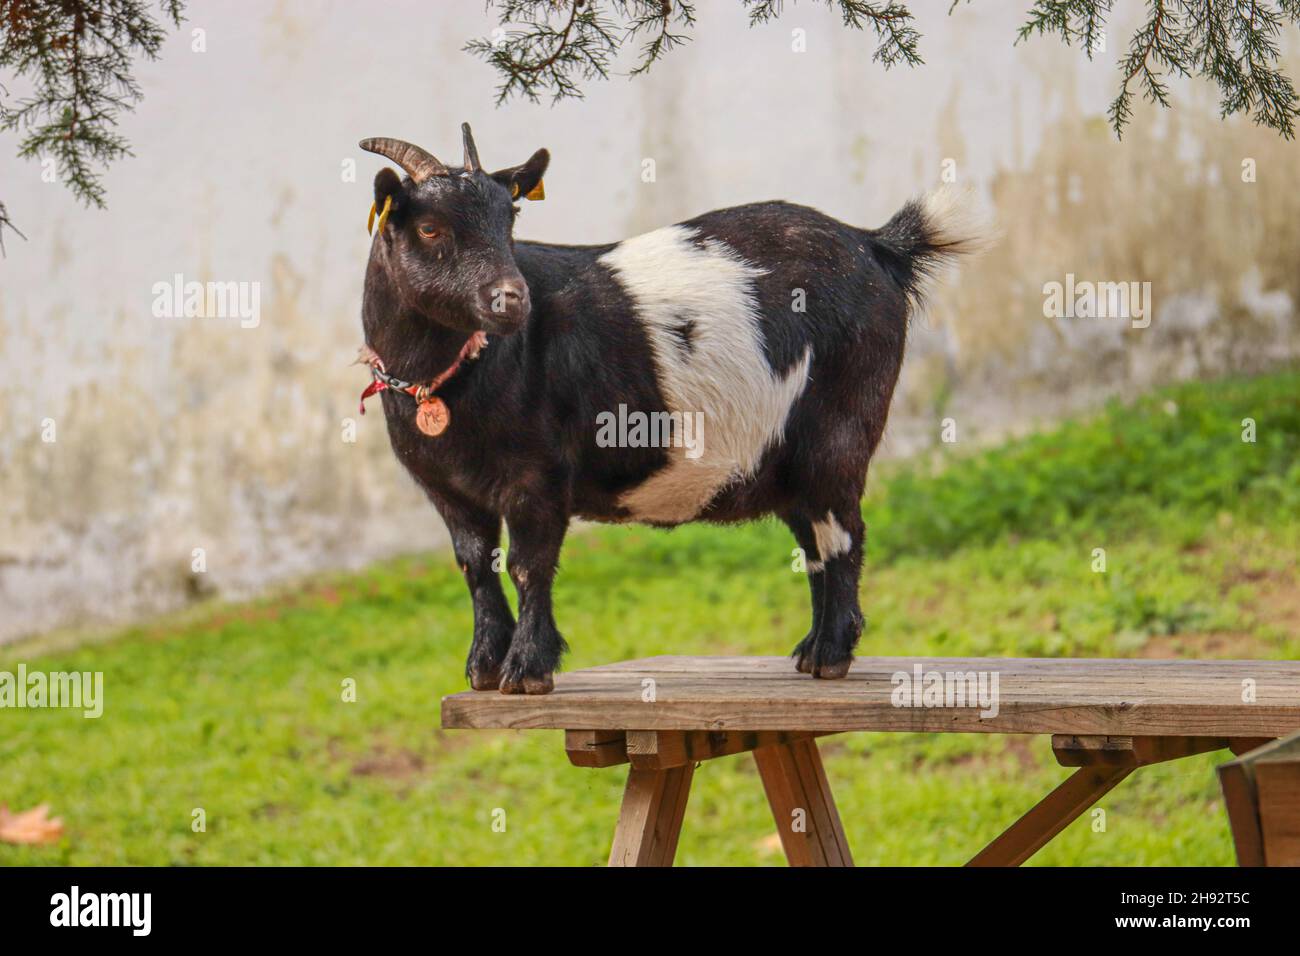 Pygmy goat on a table Stock Photo